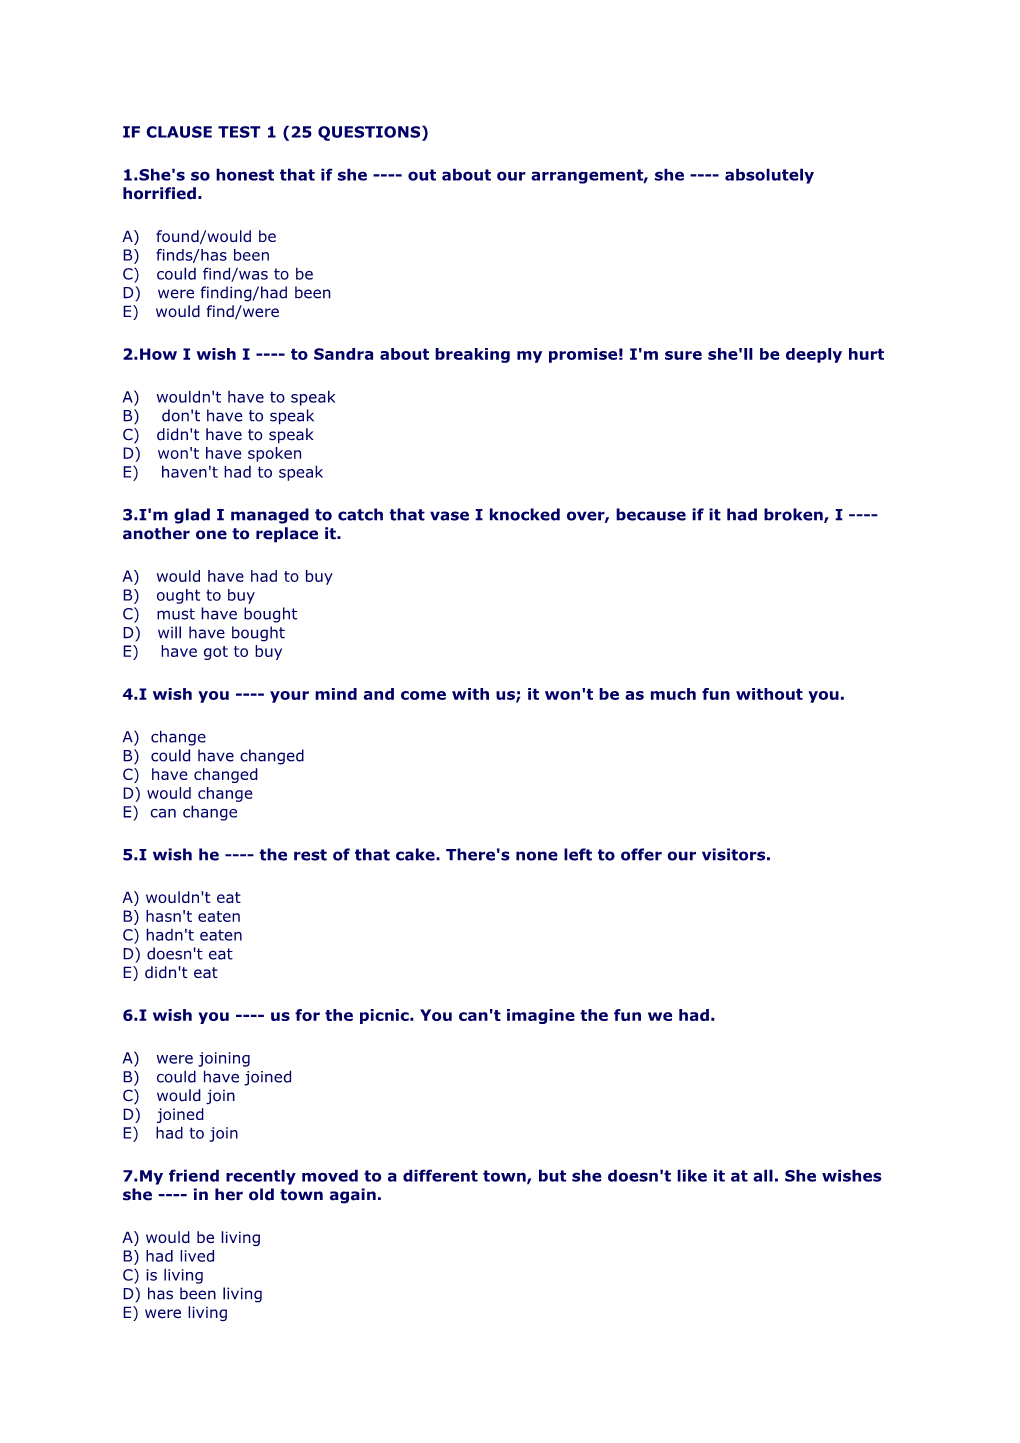 If Clause Test 1 (25 Questions)